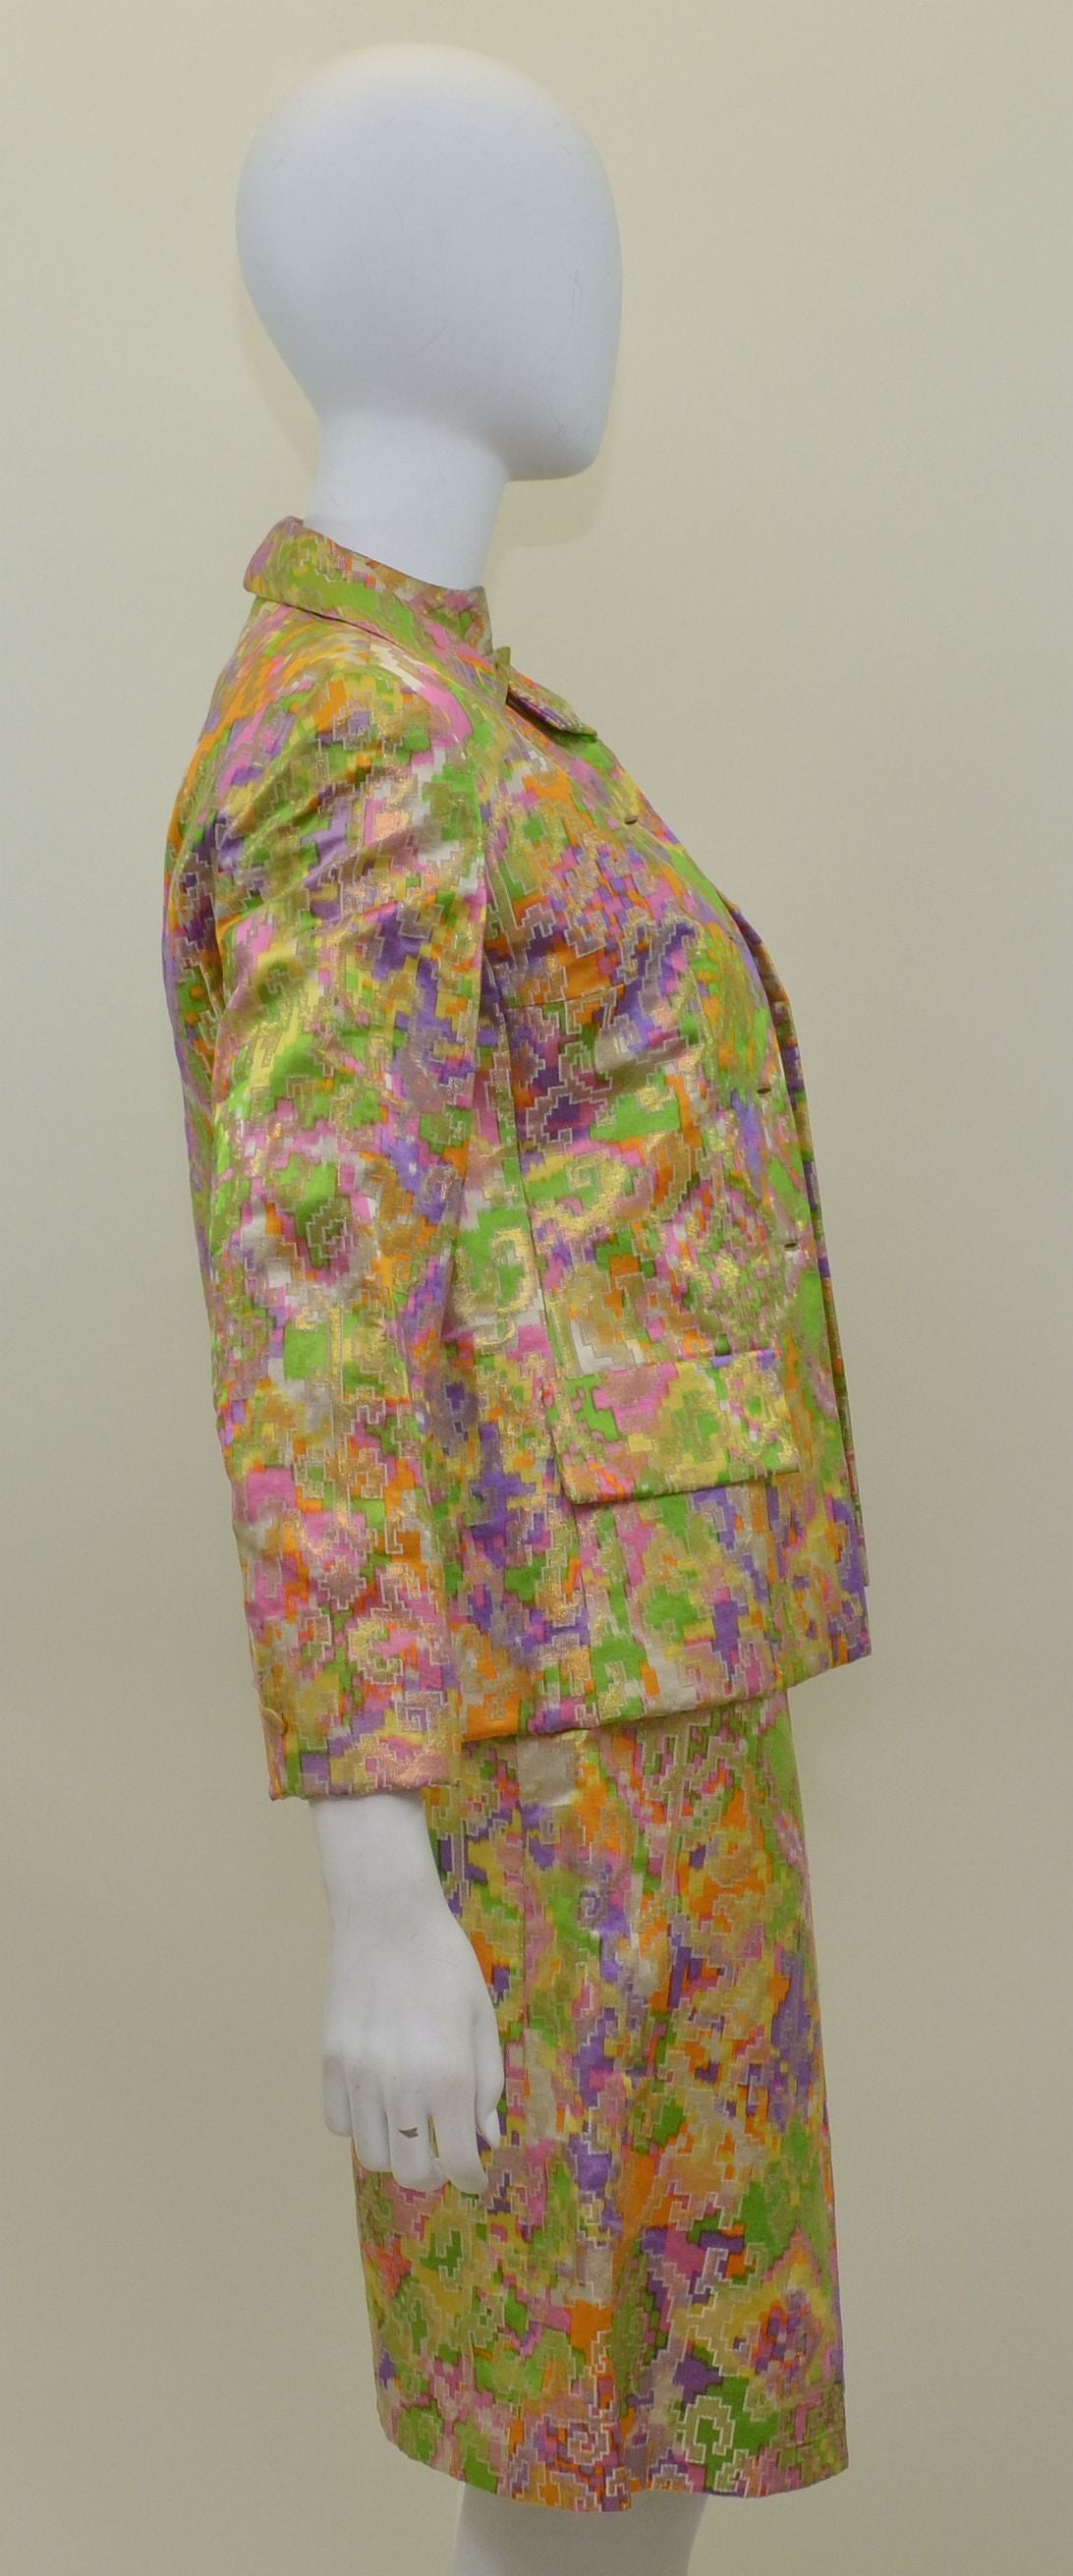 Vintage1960's Christian Dior silk Brocade 3 Piece Suit Set. Color, pattern and quality of fabric is of extraordinary quality. Jacket features gold button closures along the front as well as the cuffs, faux flap pockets at the front, and fully lined